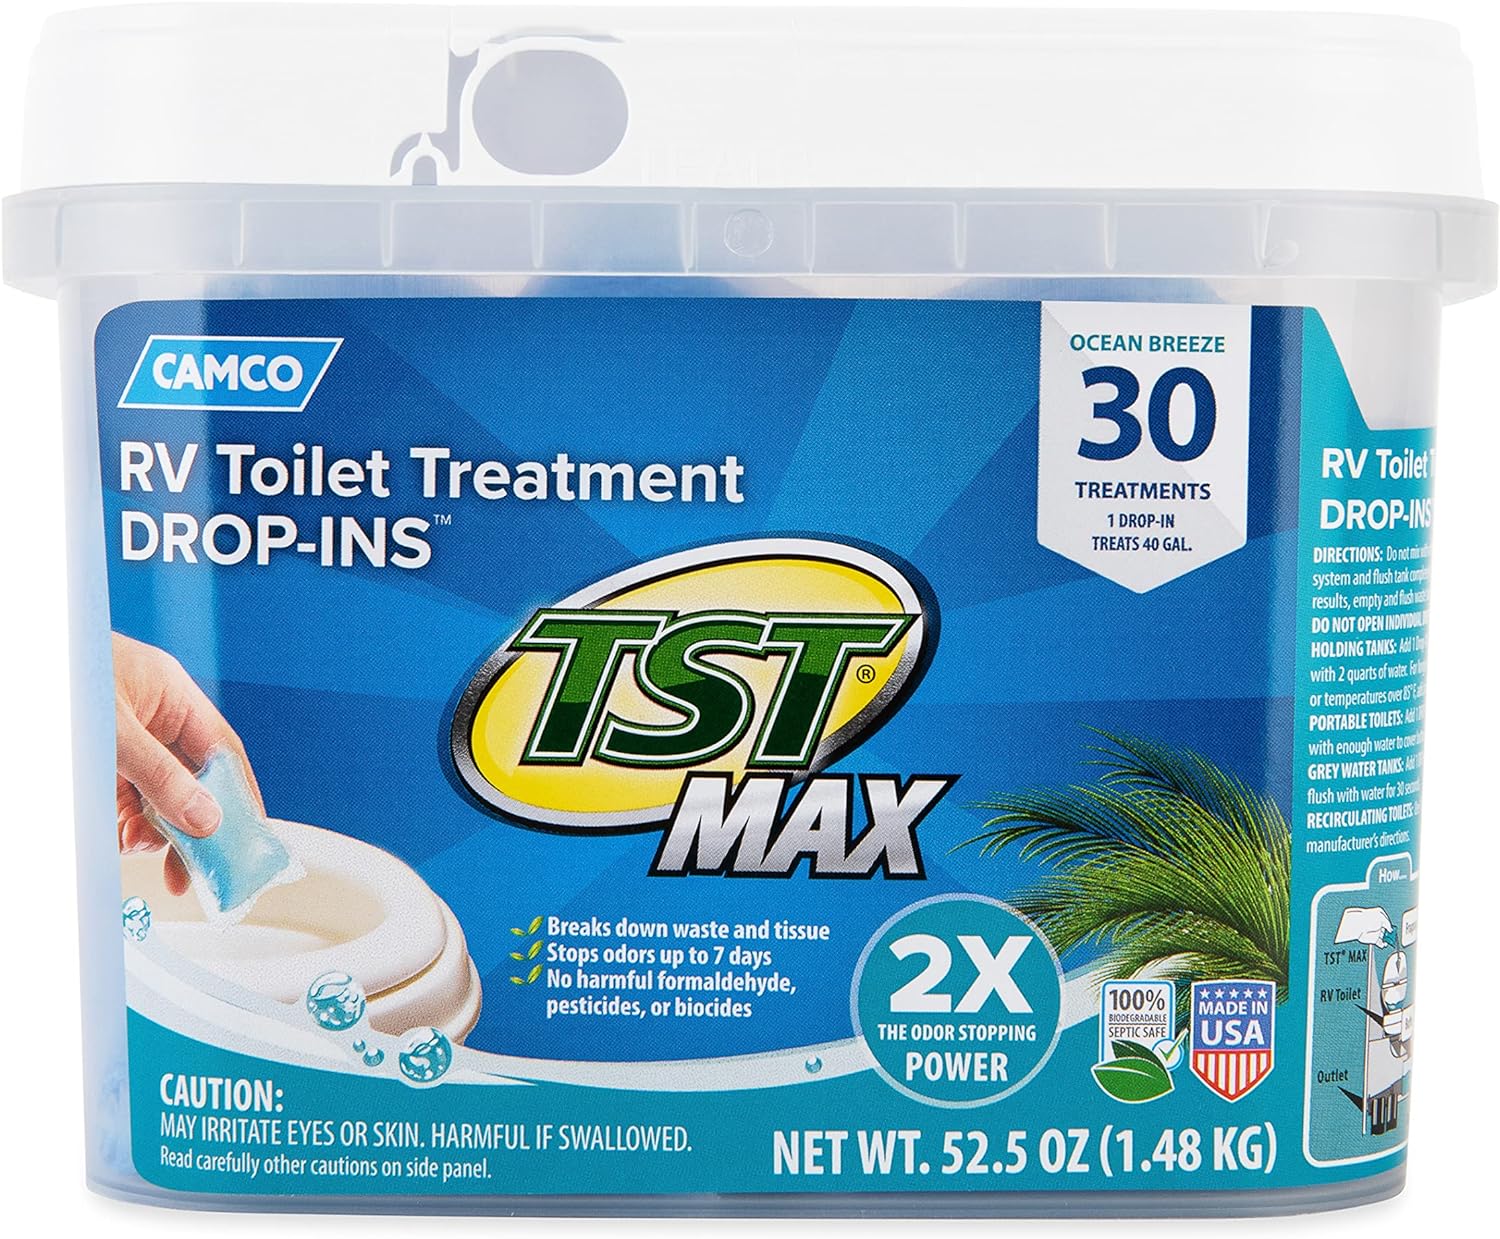 Camco Toilet Treatment Drops for RV Toilets